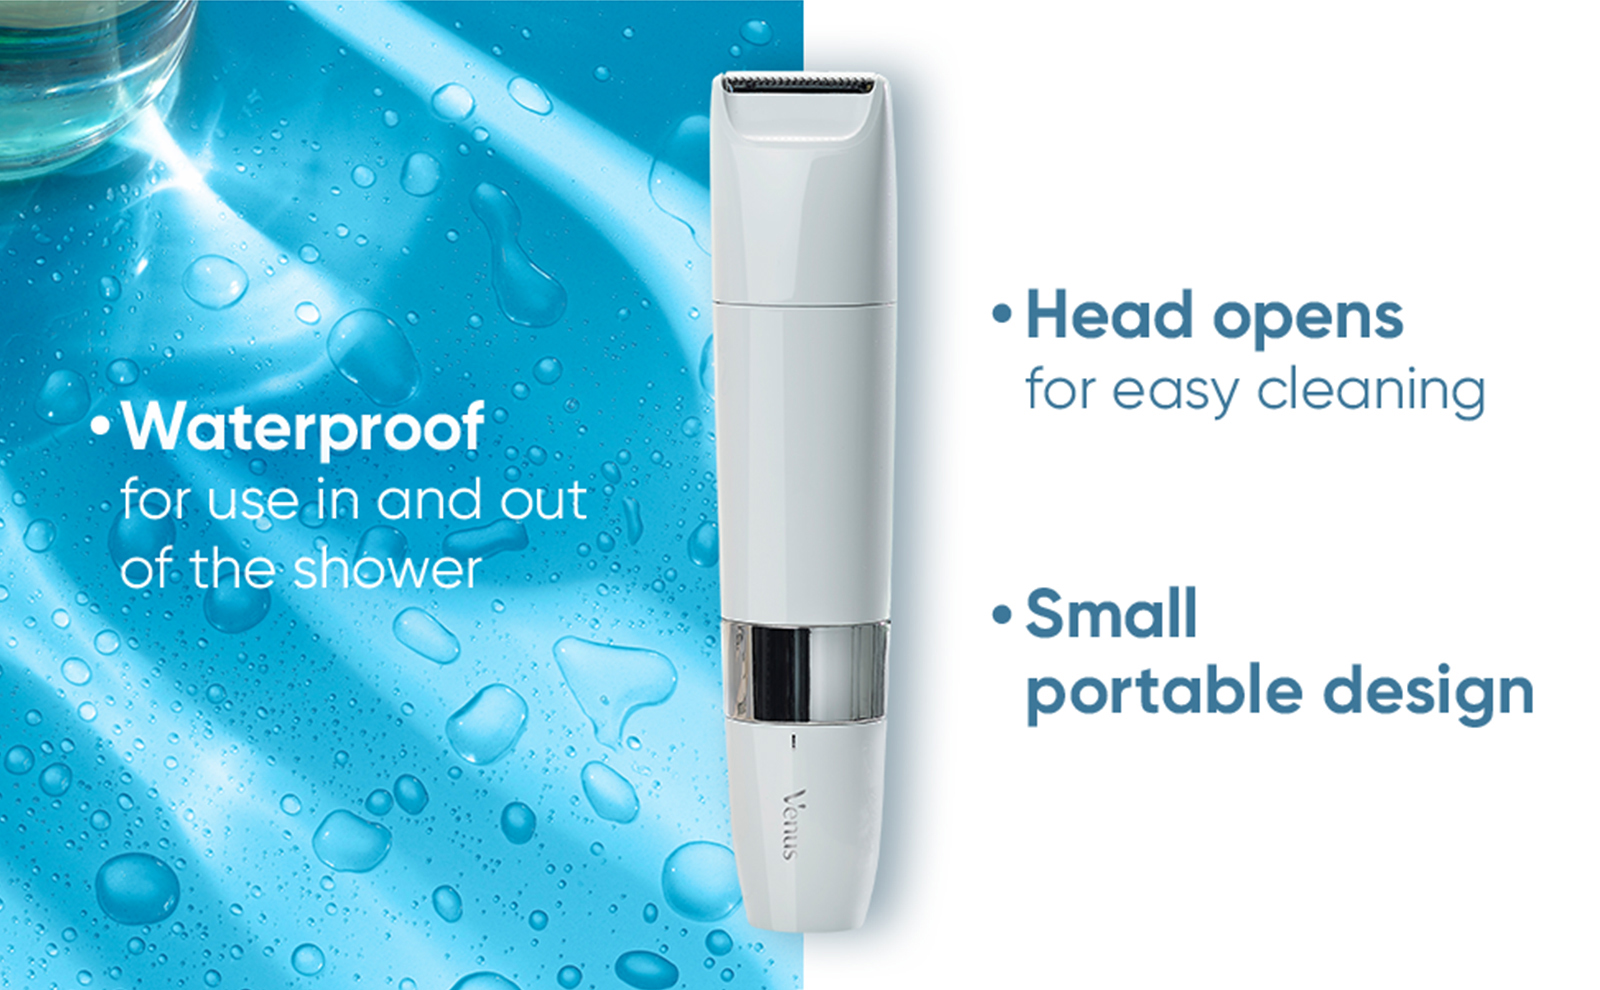 'Waterproof for use in and out of the shower. Head opens for easy cleaning.
                                  Small portable design.